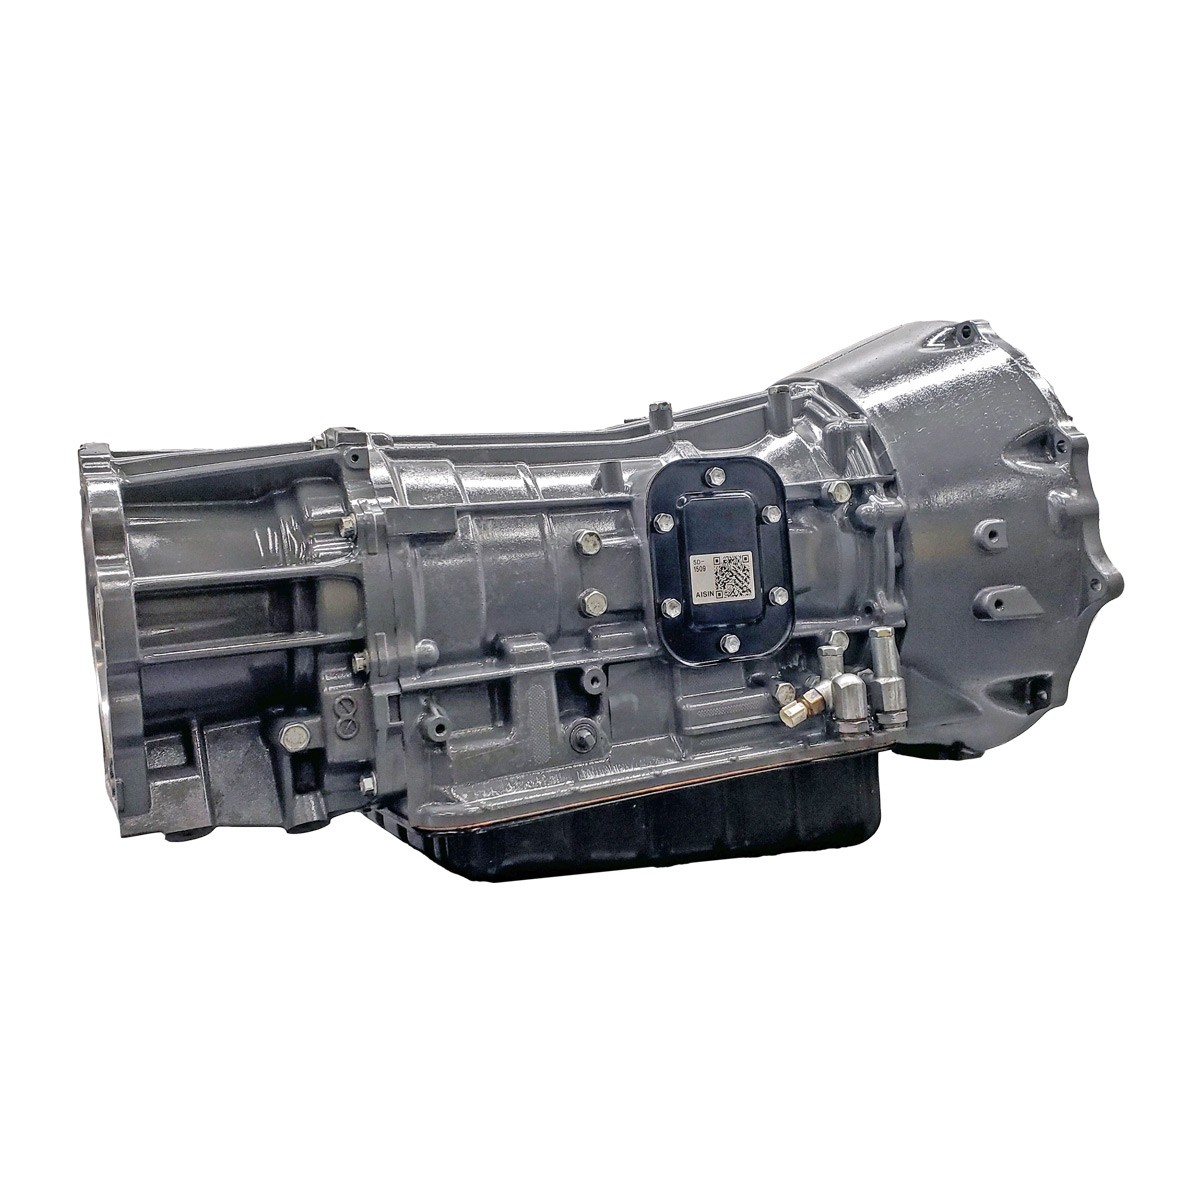 * DODGE TRUCKS AS69RC HEAVY DUTY TRANSMISSION. CLUTCH MODULE RGPZ-009  2013-On. Upgrades Available Here